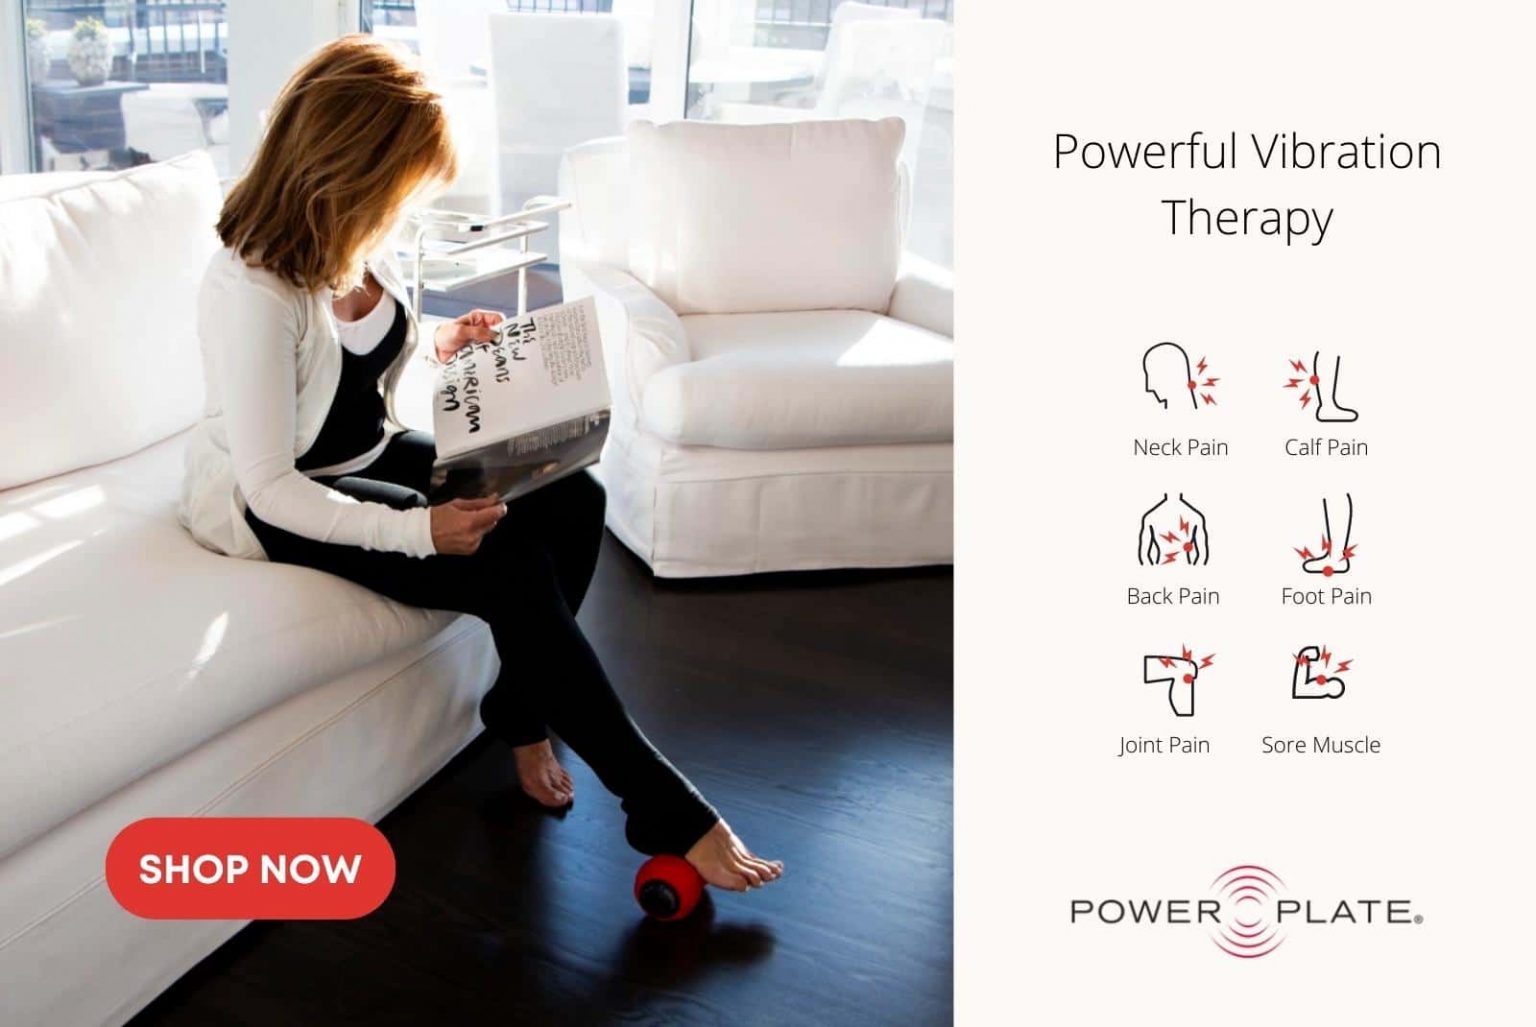 Power Plate Pulse - targeted vibration therapy for relief from pain and faster muscle recovery